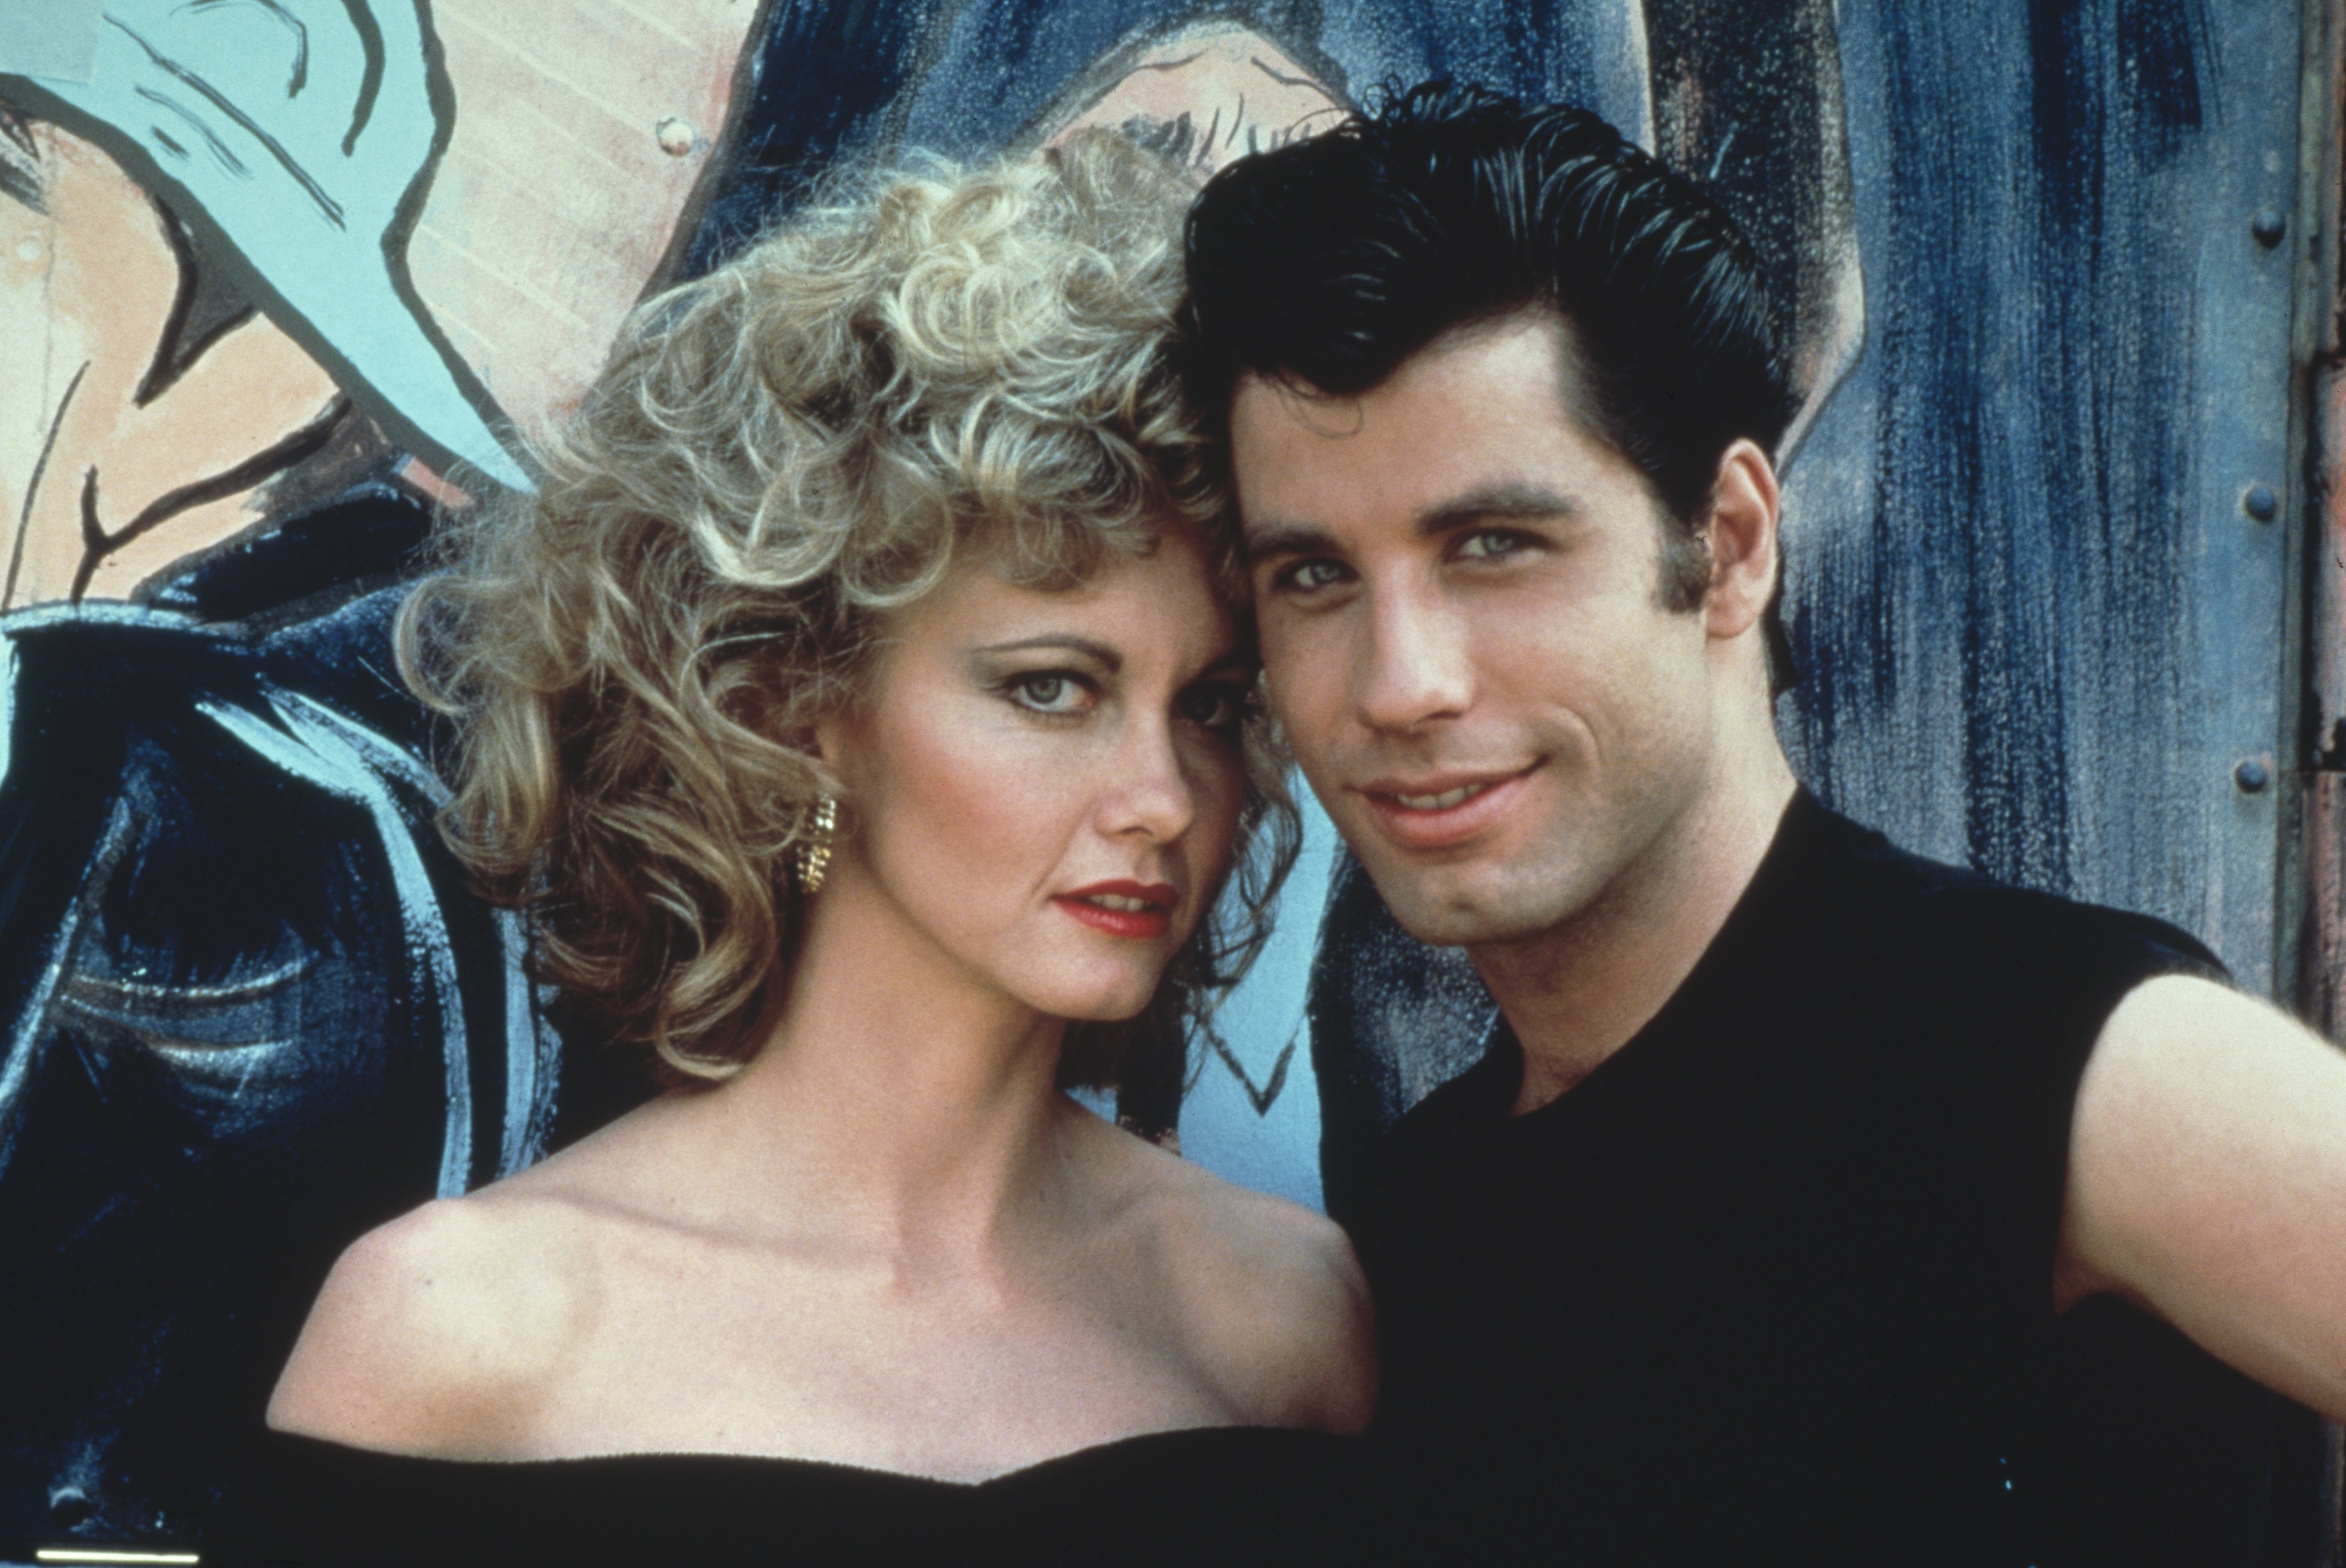 Actress Olivia Newton-John as Sandy Olsson and actor John Travolta as Danny Zuko in the hit film "Grease," 1978. / Source: Getty Images